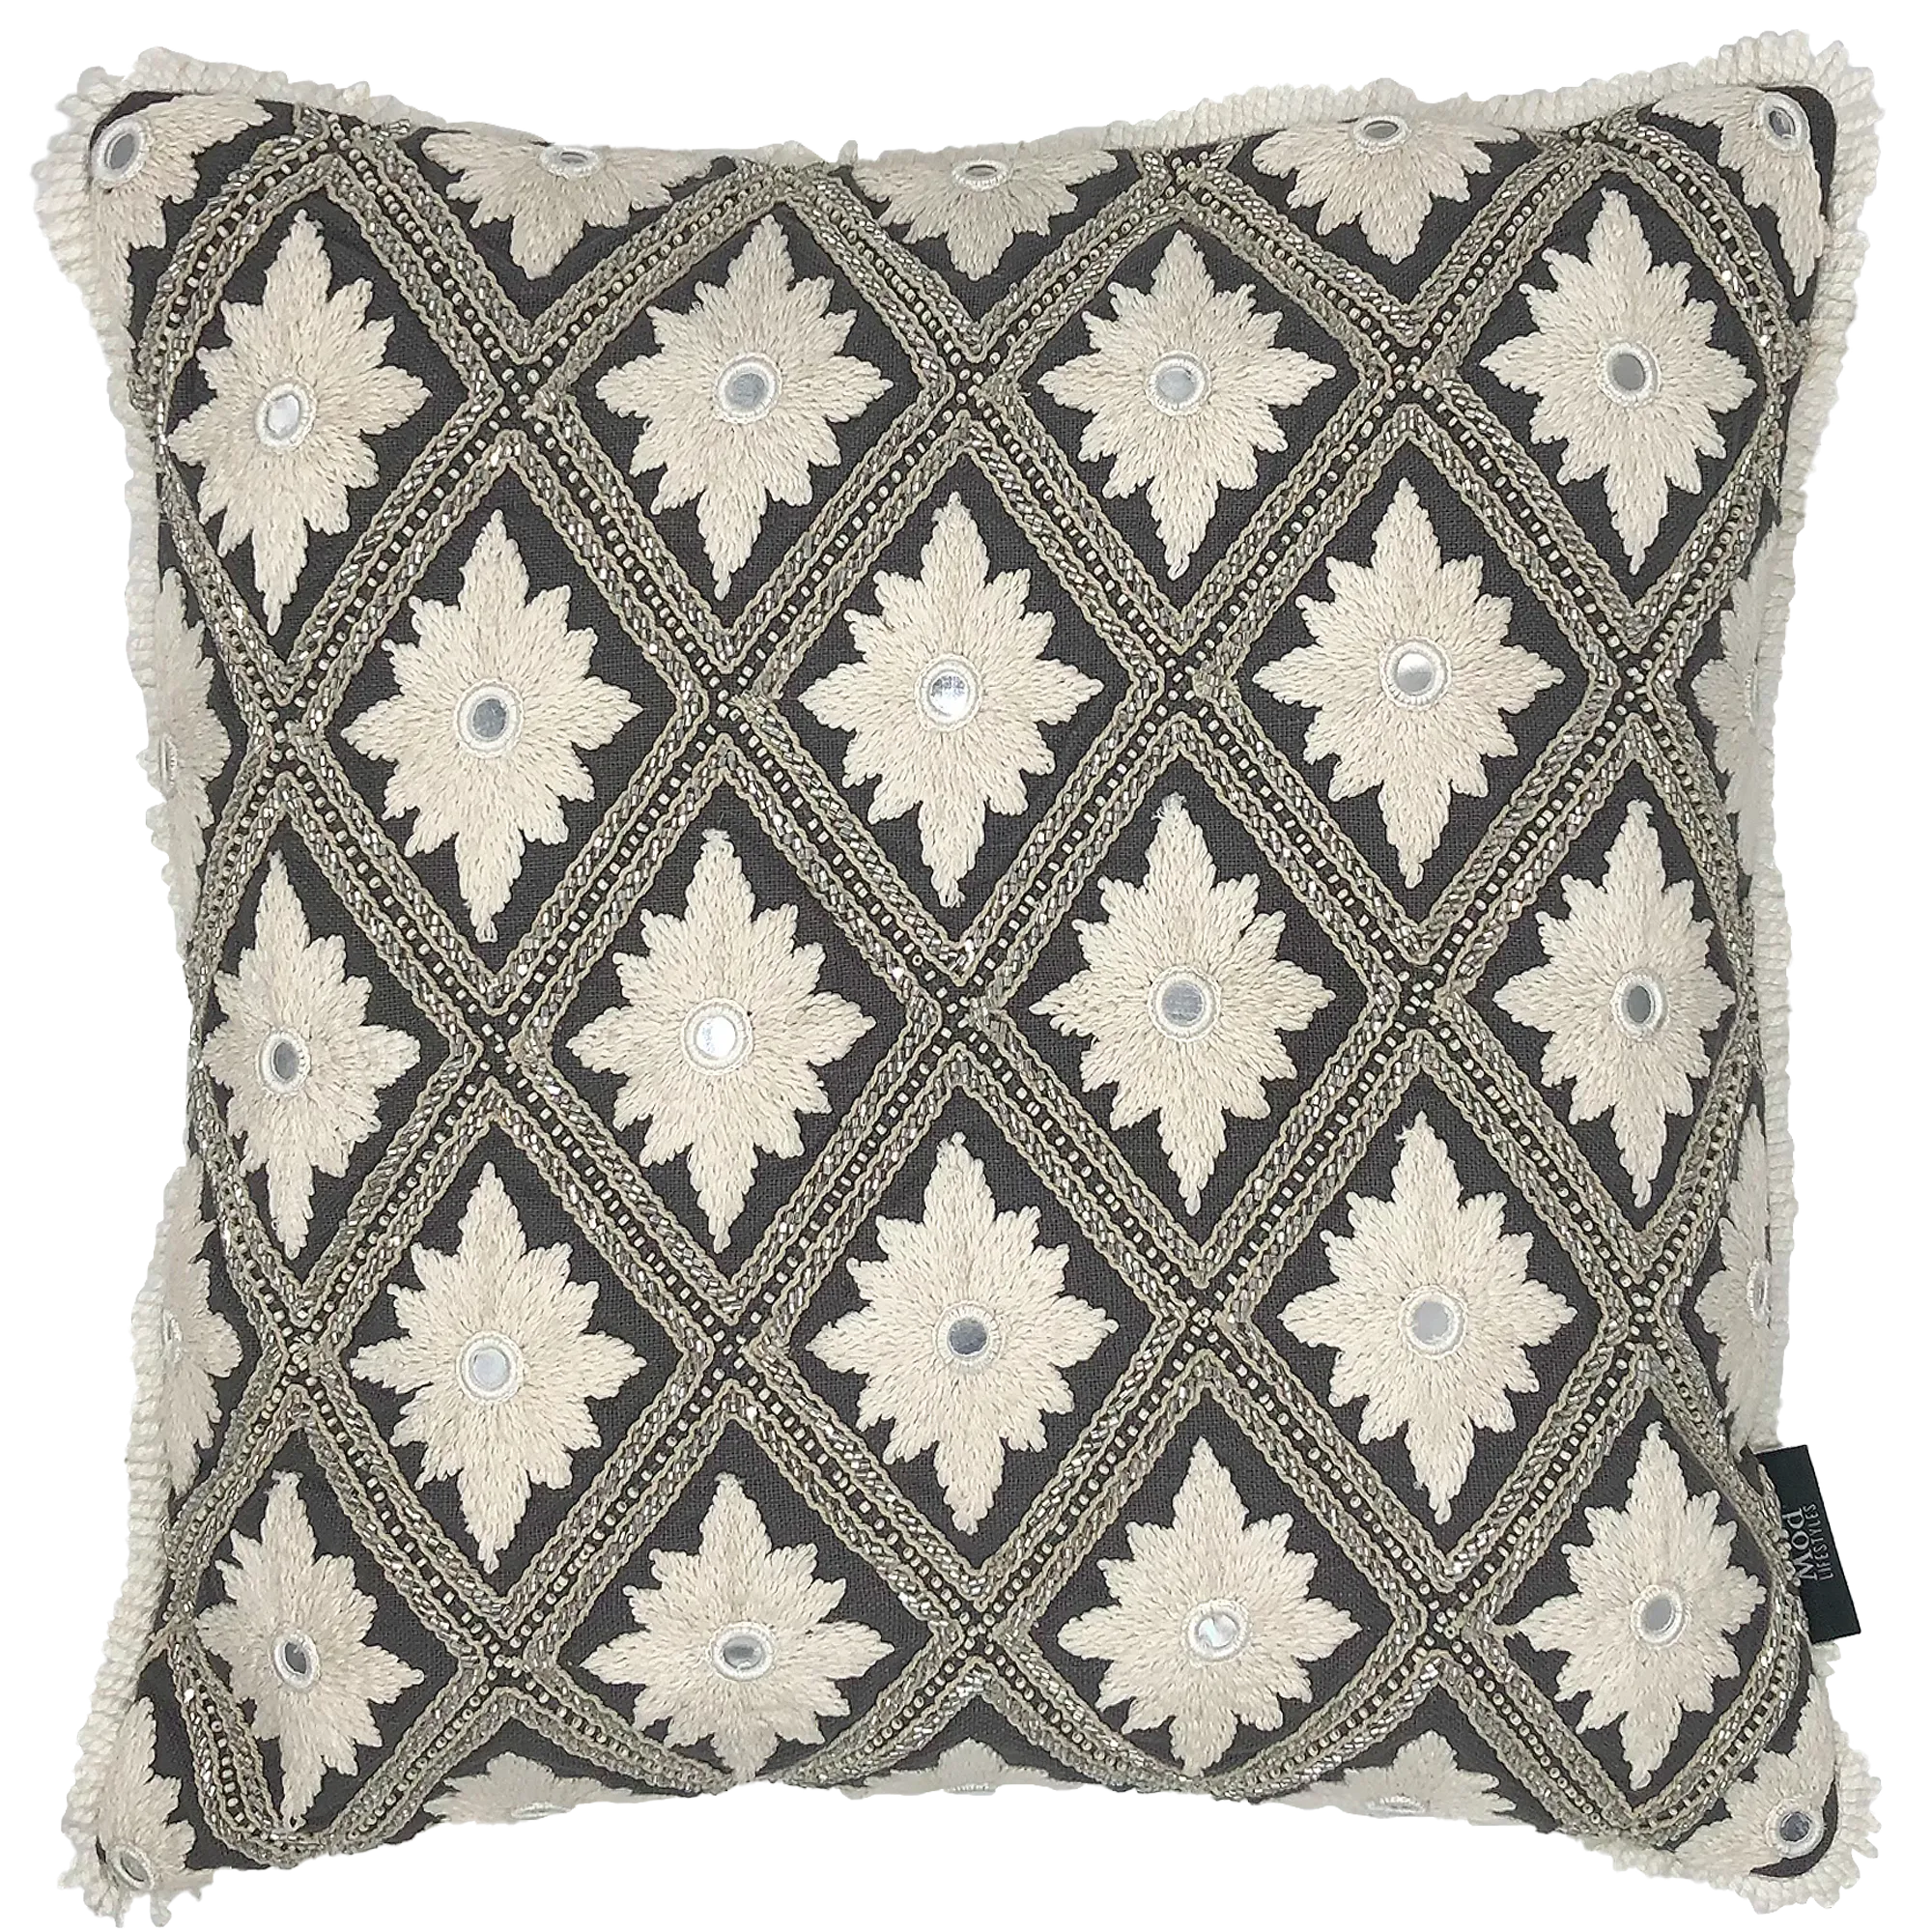 Geometric Embroidery Pillow with Fringe, 18''x18'' home decor - Mod Lifestyles